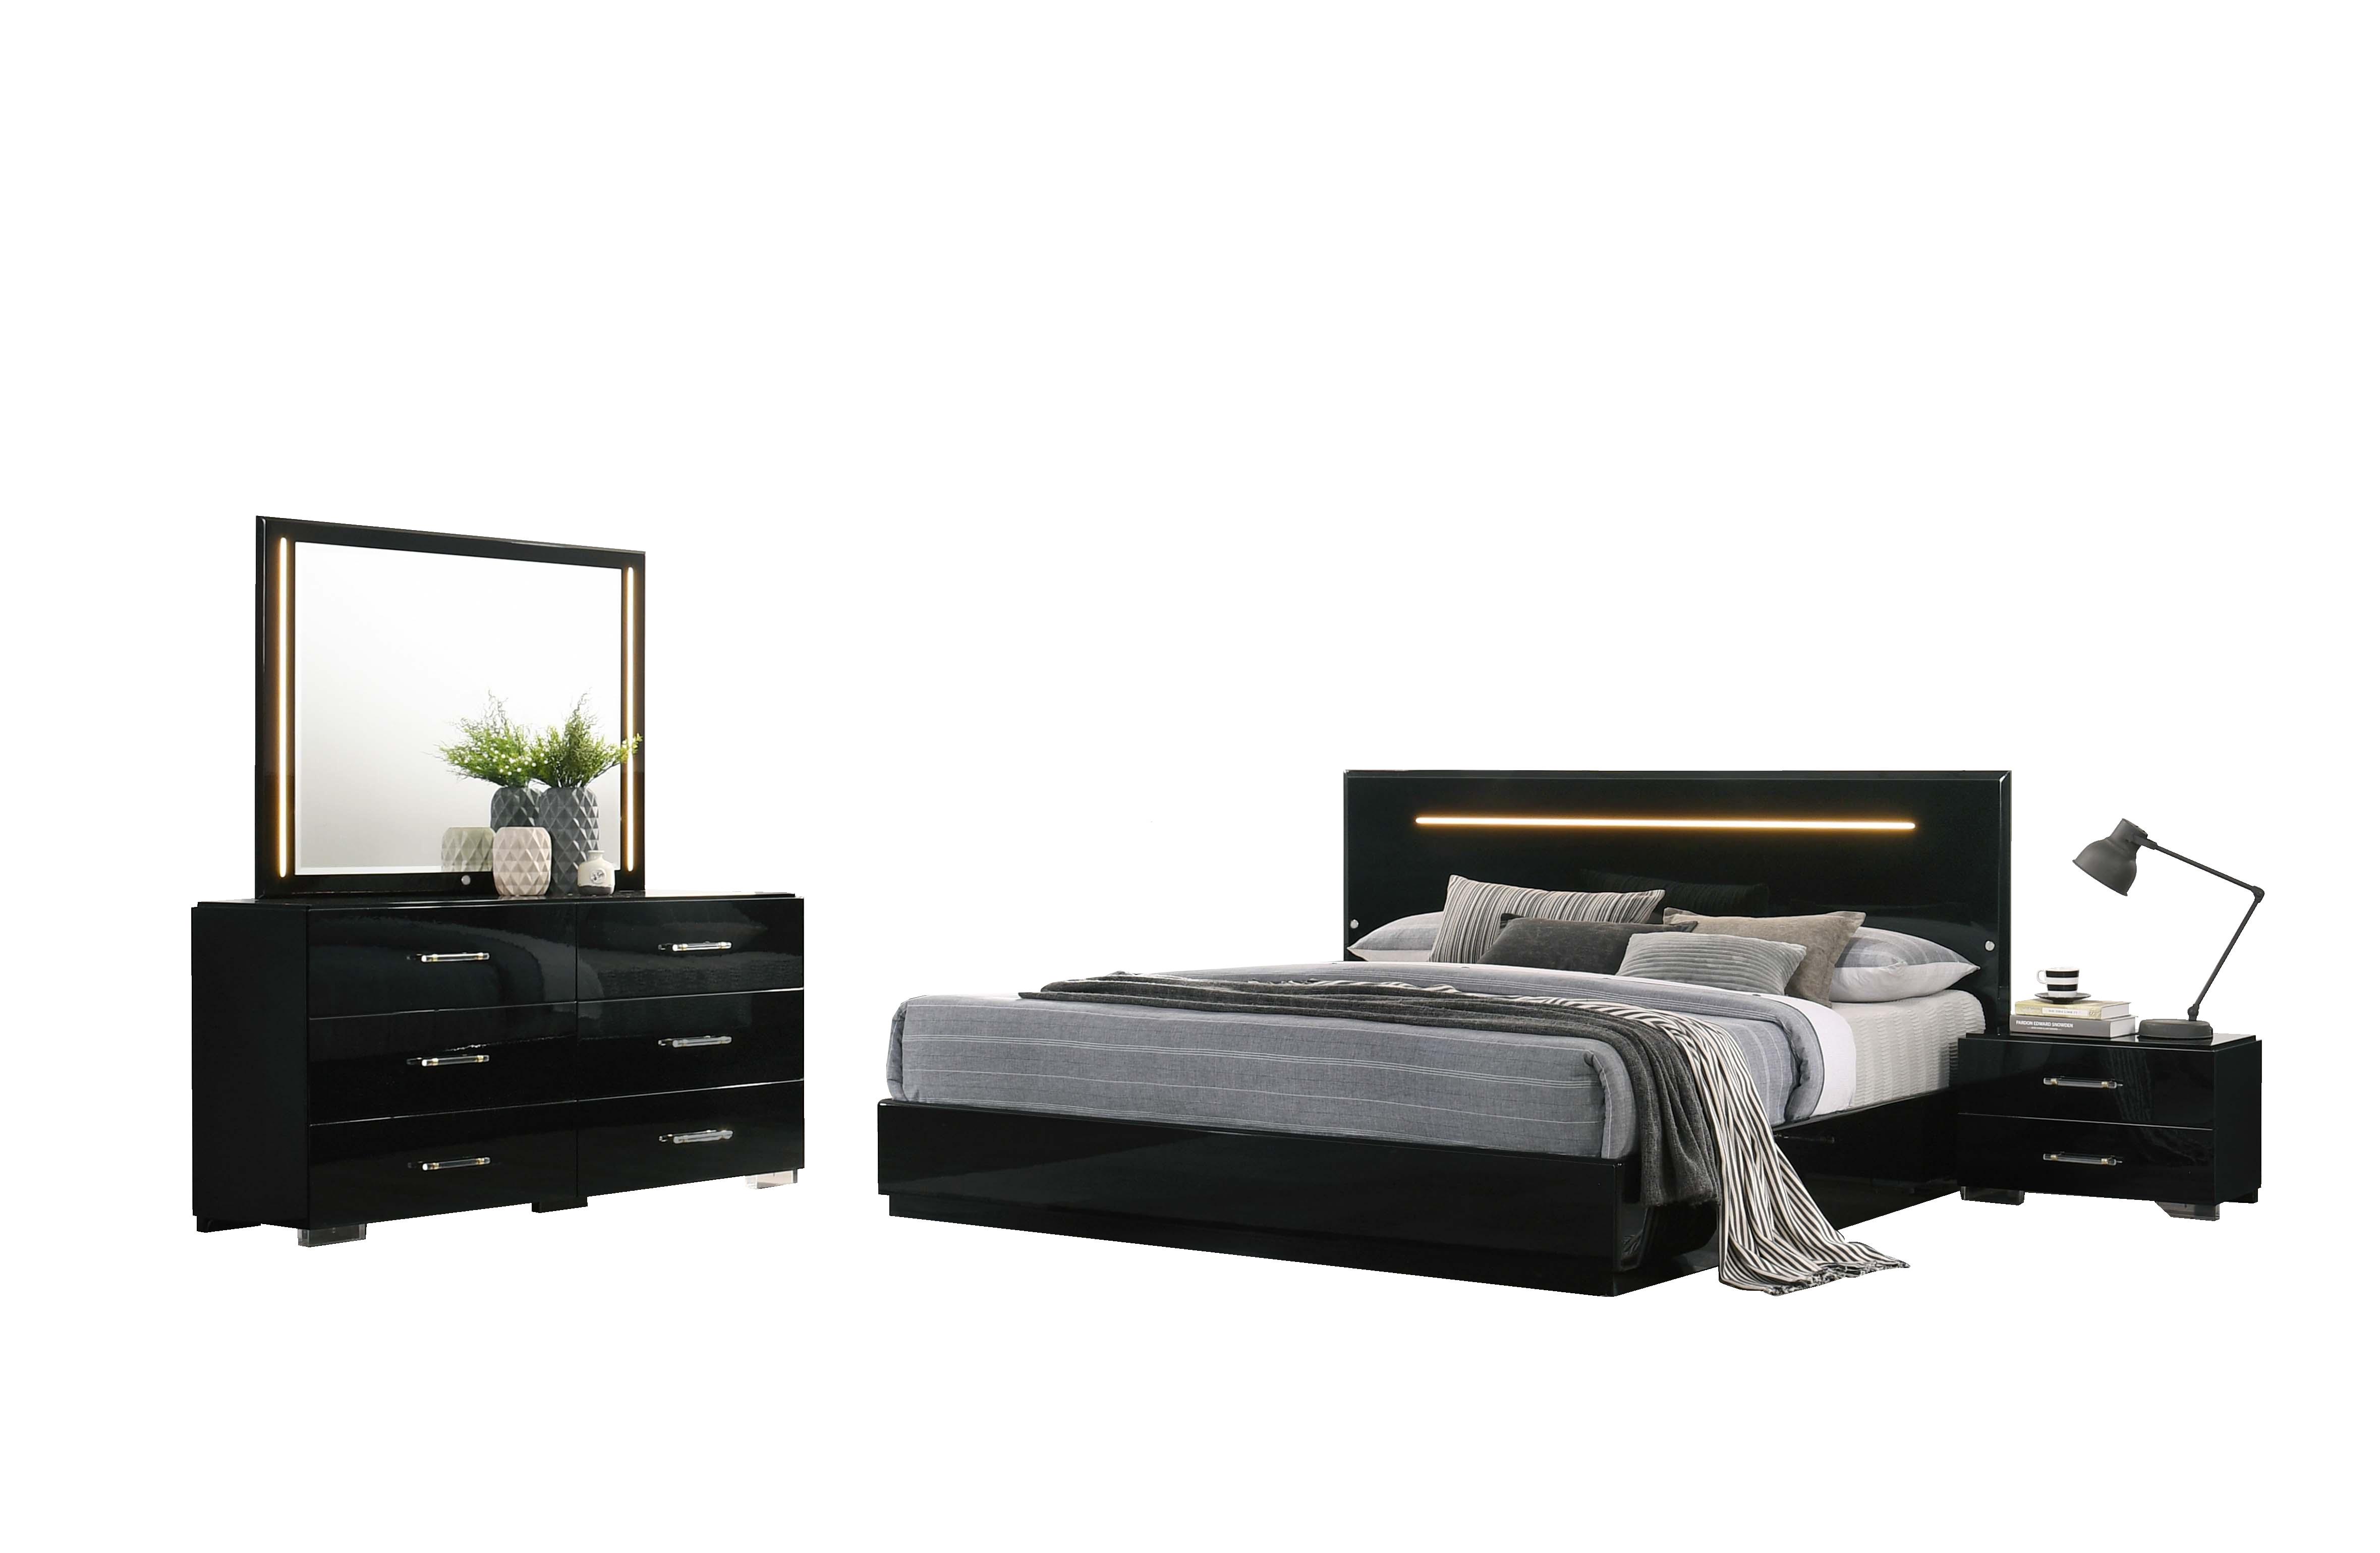 

    
High Gloss Black Finish Platform Queen Size Bedroom Set 4Pcs Florence by Chintaly Imports
